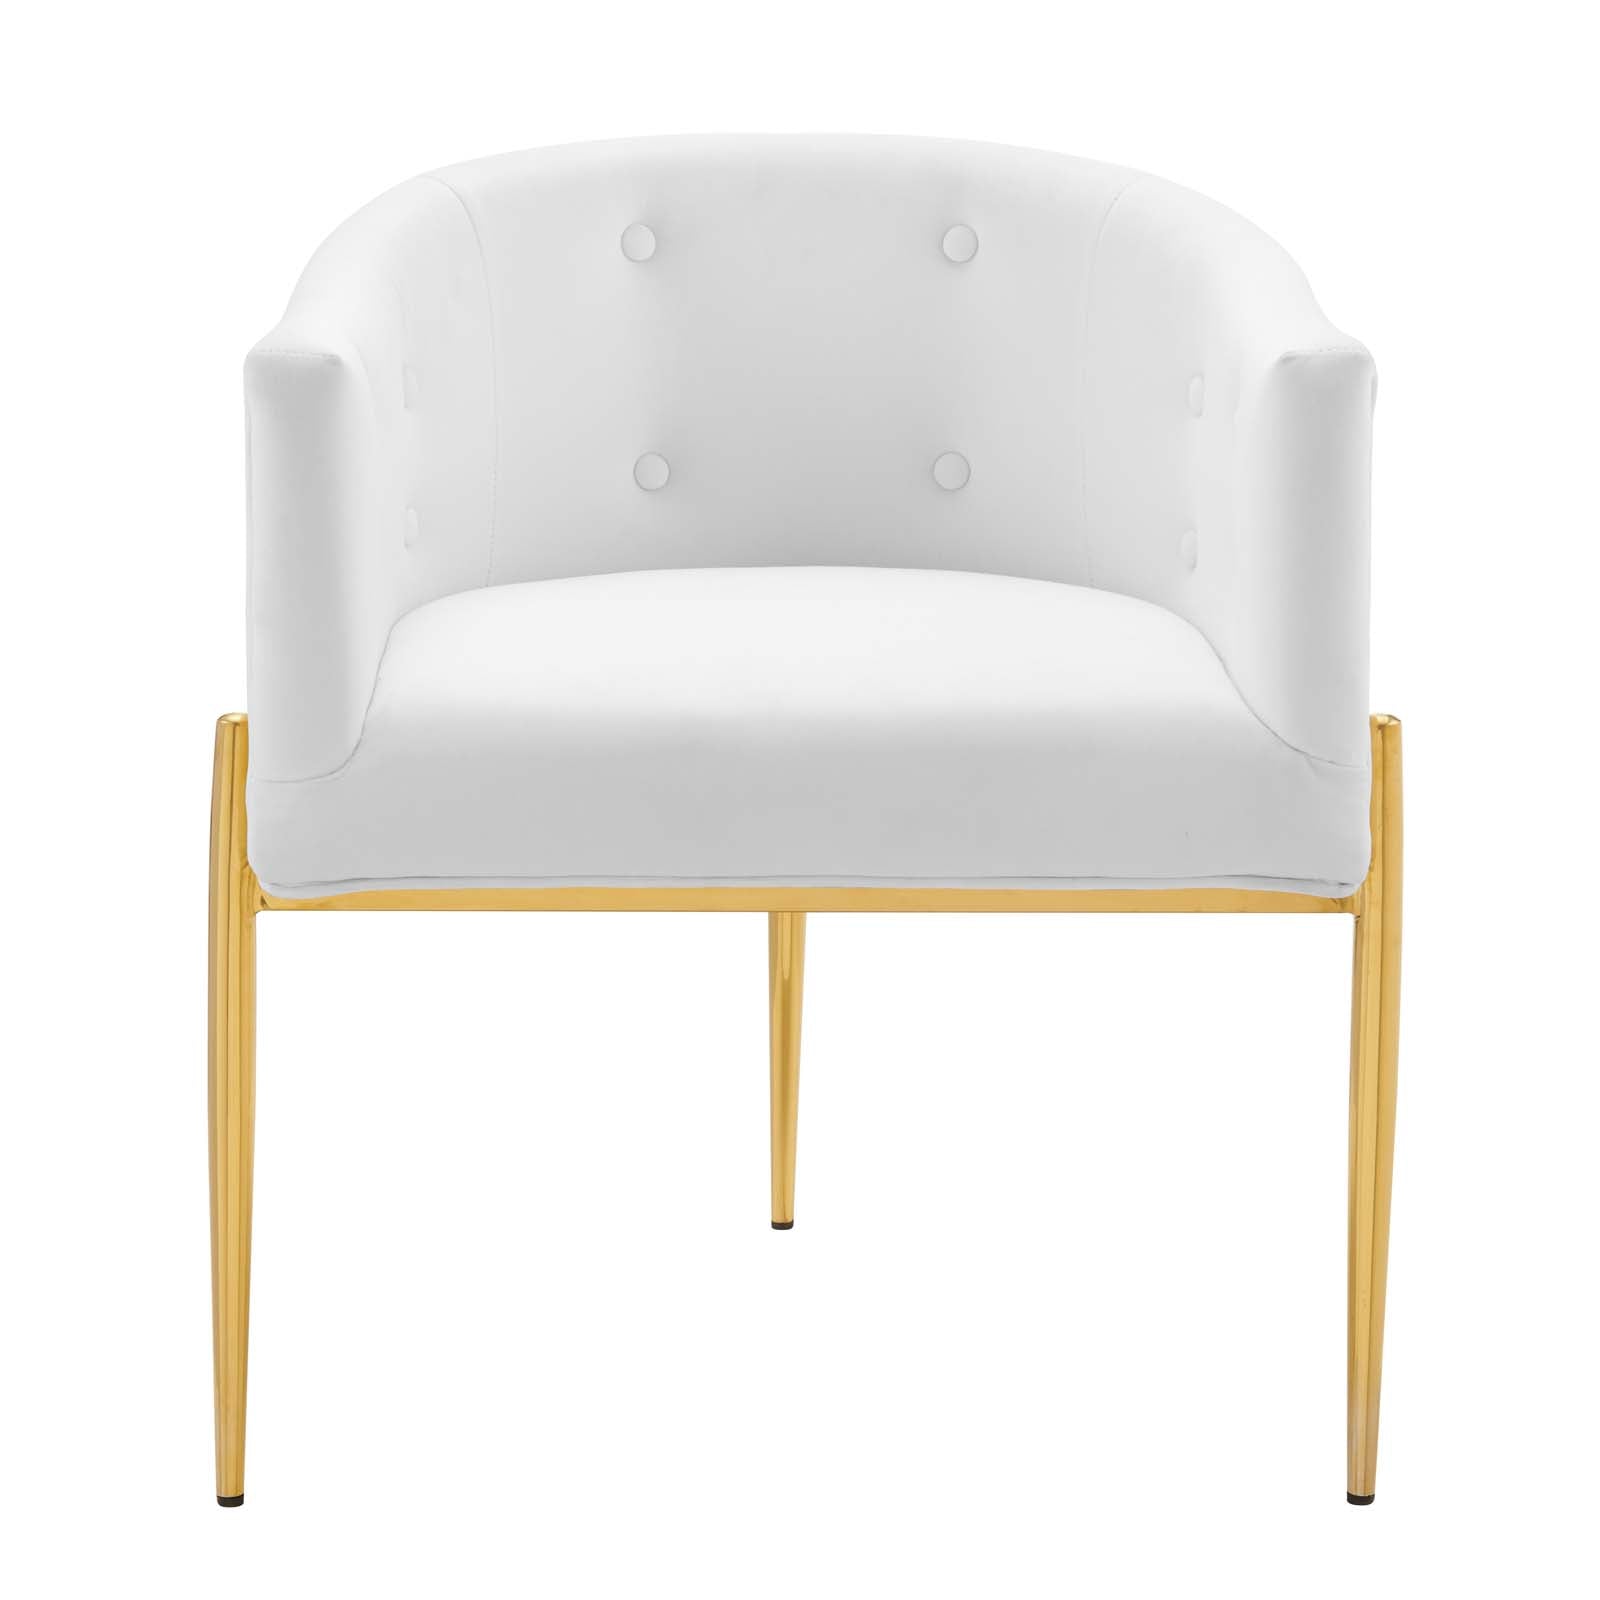 Modway Accent Chairs - Savour Tufted Performance Velvet Accent Chairs - Set of 2 White